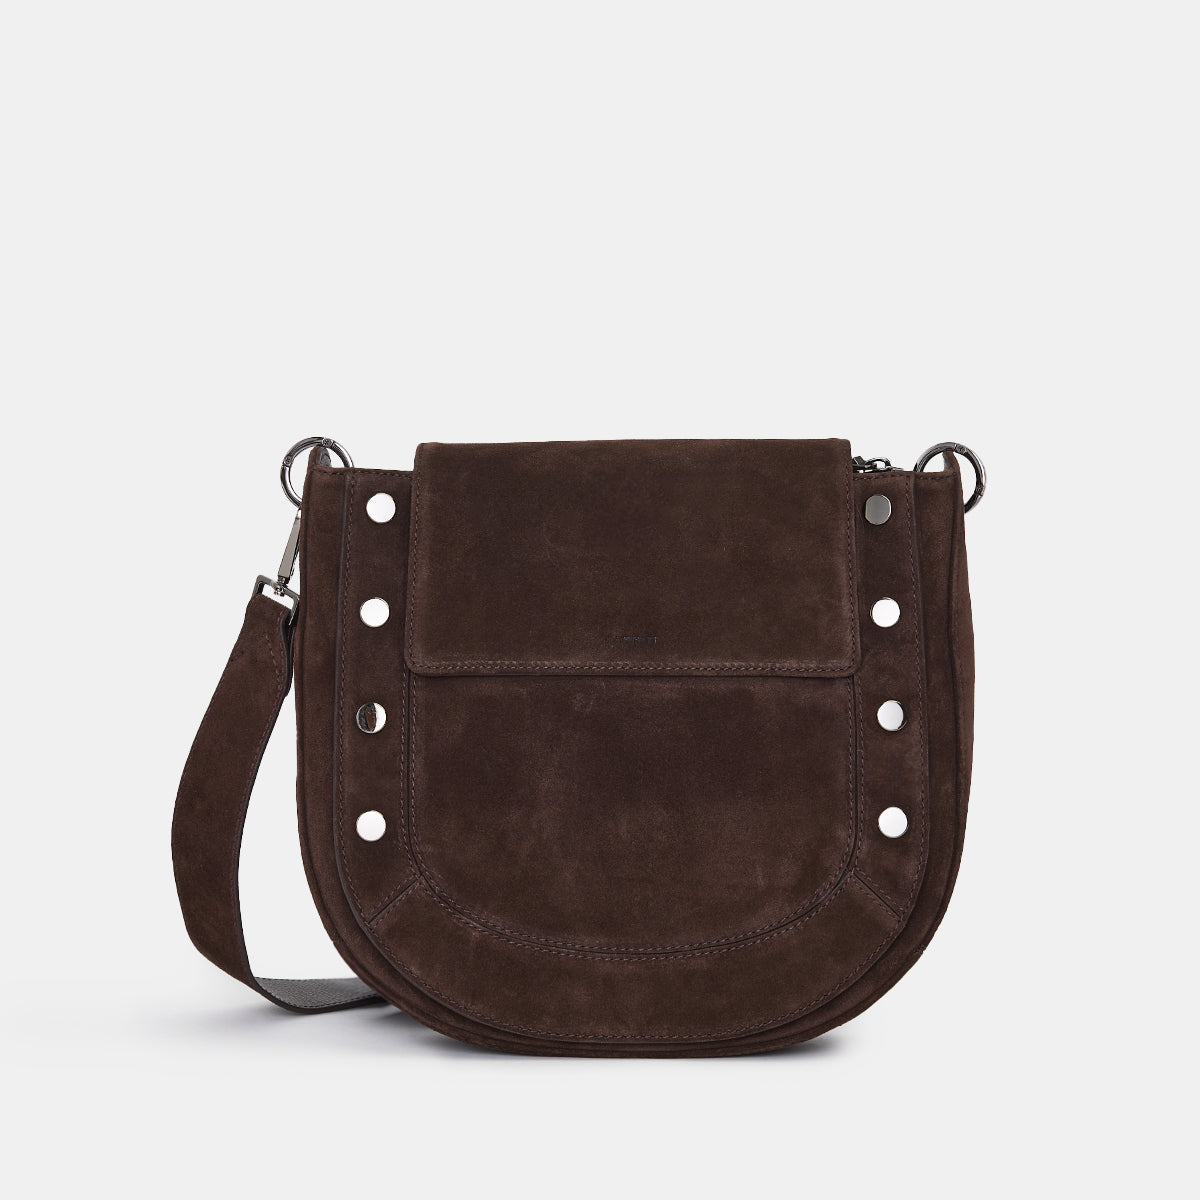 Kayce-Saddle-Espresso-Suede-Front-View